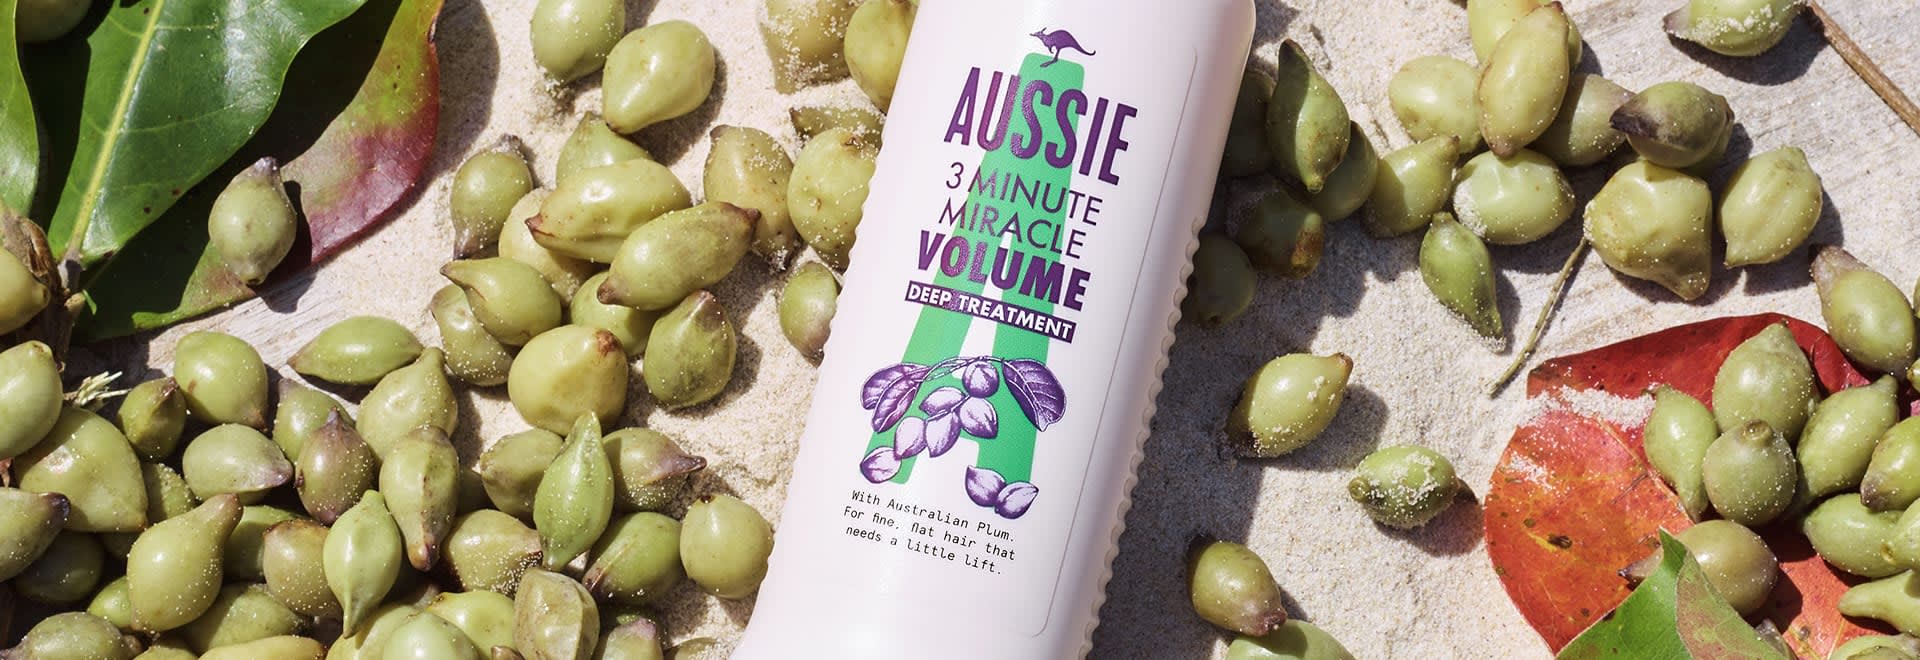 A photo of Aussie products lying on a beach surrounded by Australian plums and manuka leaves